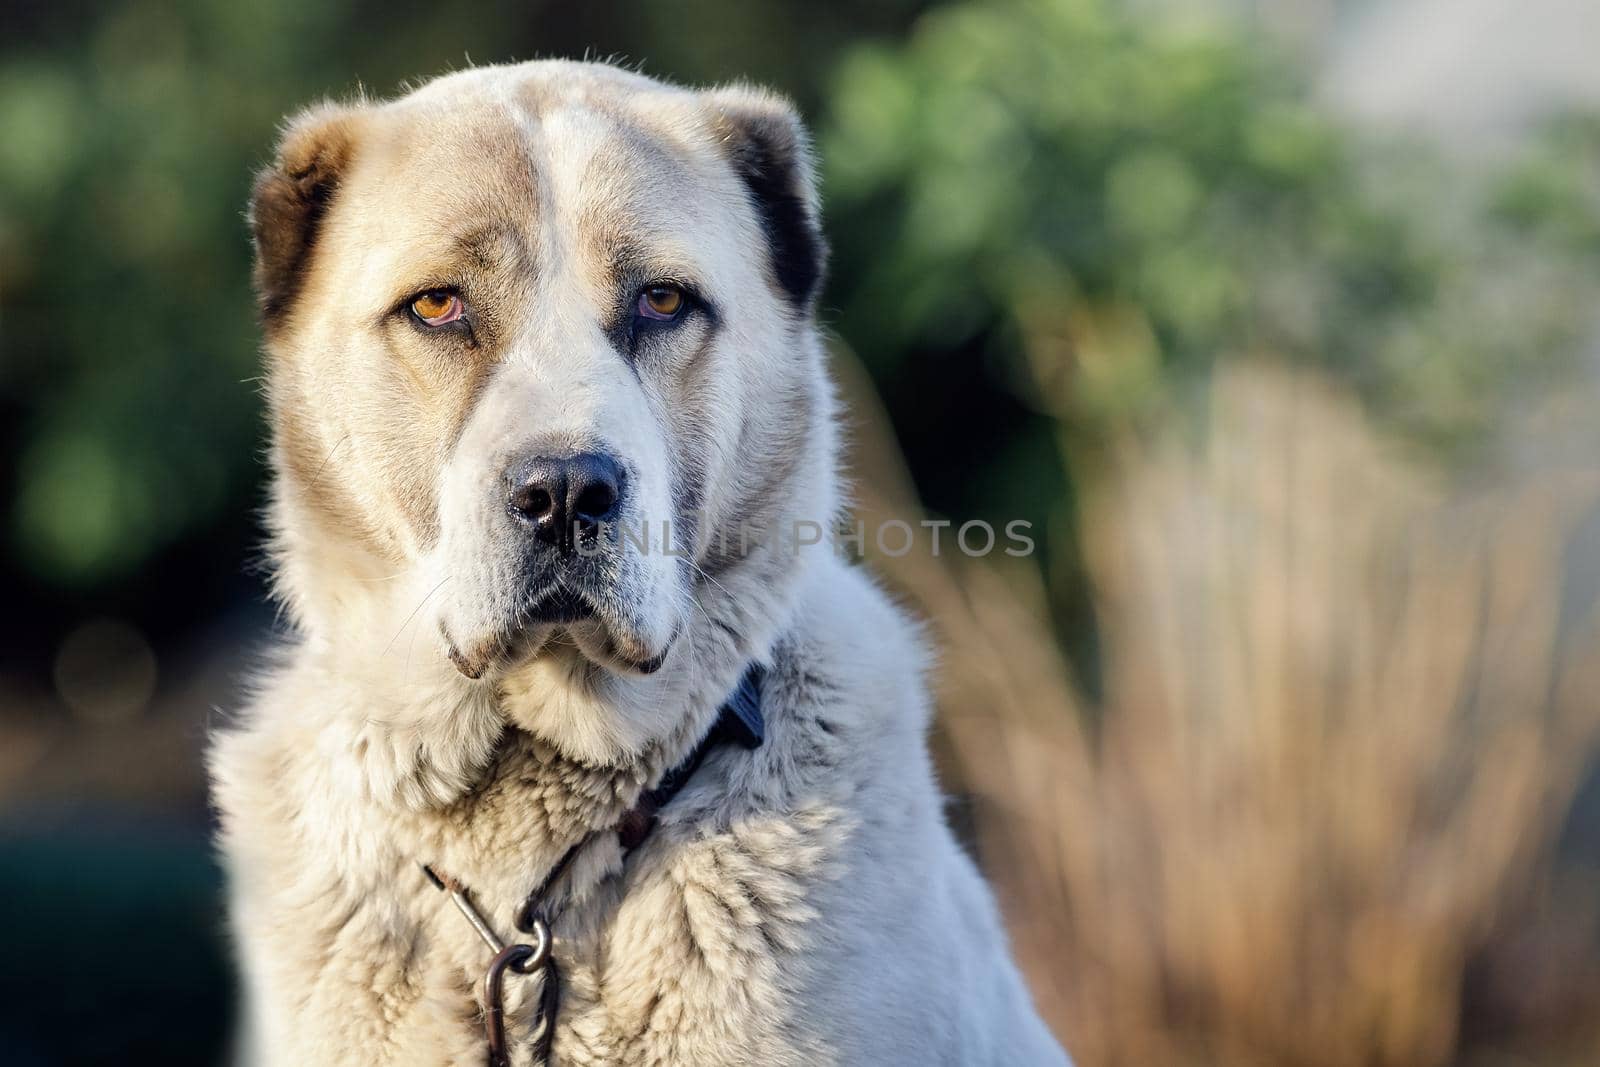 Asian shepherd dog looking straight at the viewer, with a serious expression, blurred nature background.